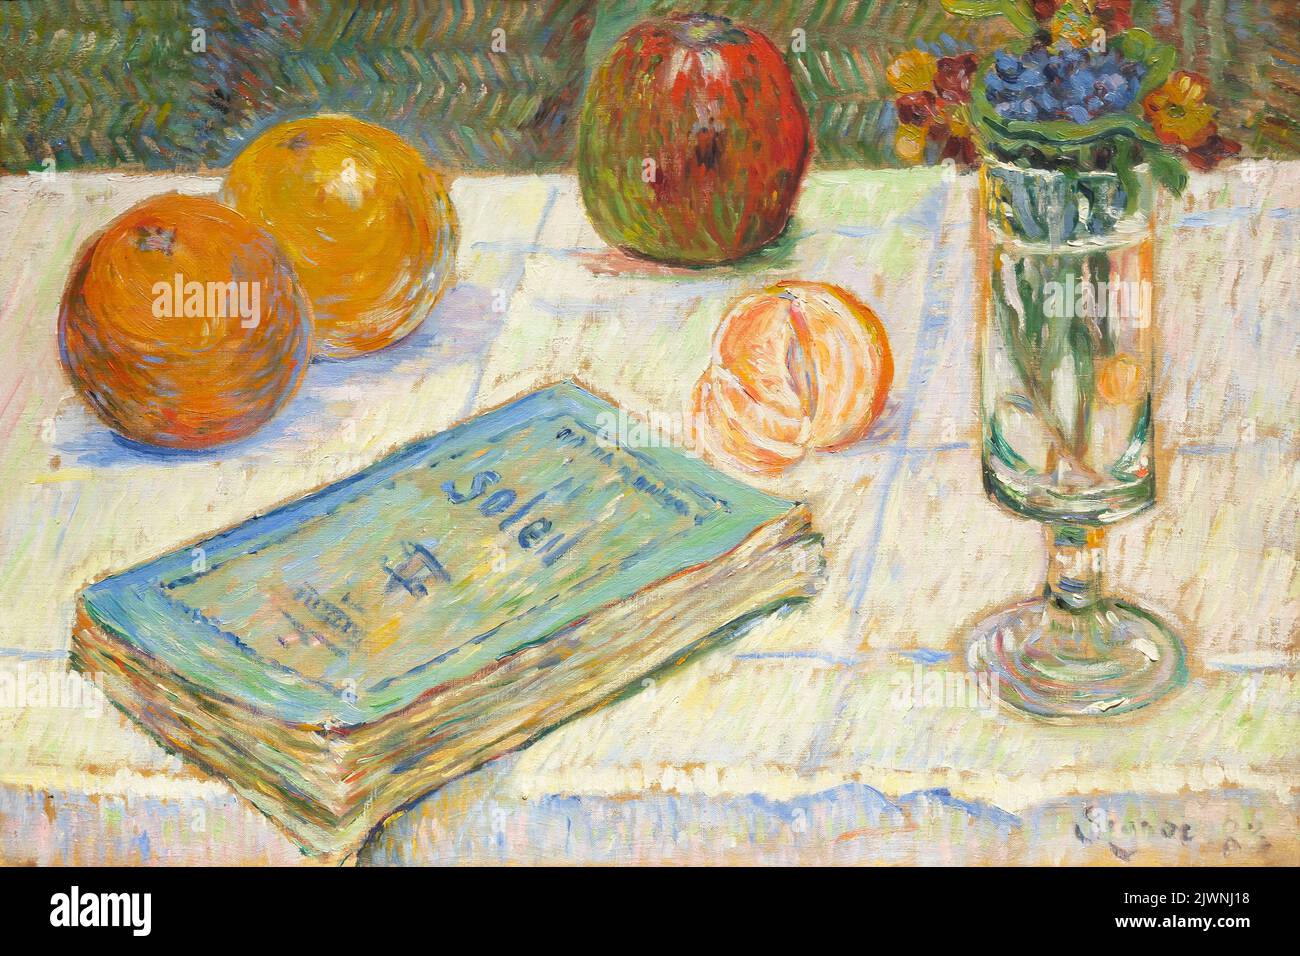 Still Life with a Book, Paul Signac, 1883, Alte Nationalgalerie, Berlin, Germany, Europe Stock Photo